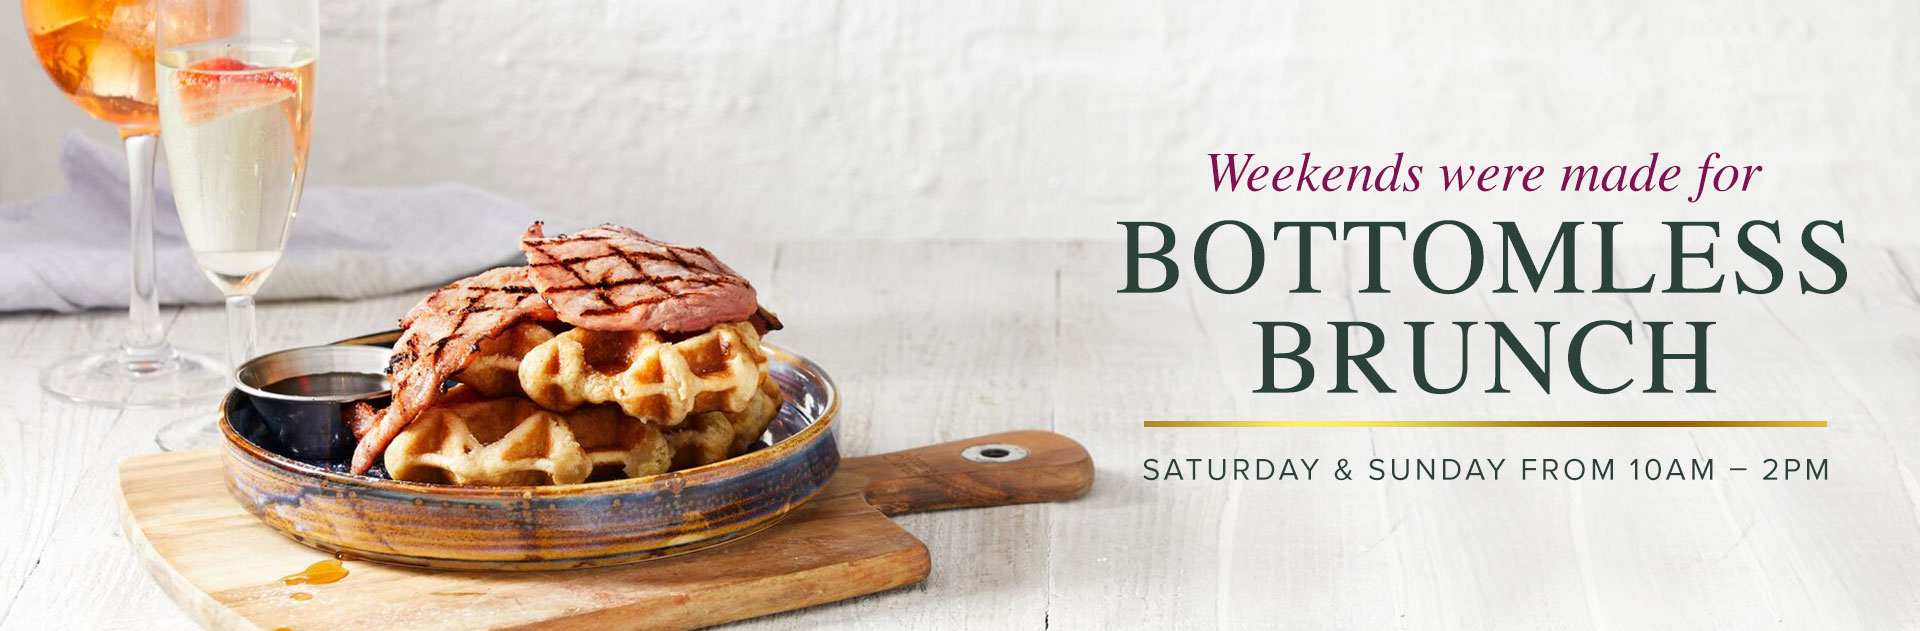 Ember Inns Three Hammers, Hammers Lane bottomless brunch of bacon, waffles and drinks